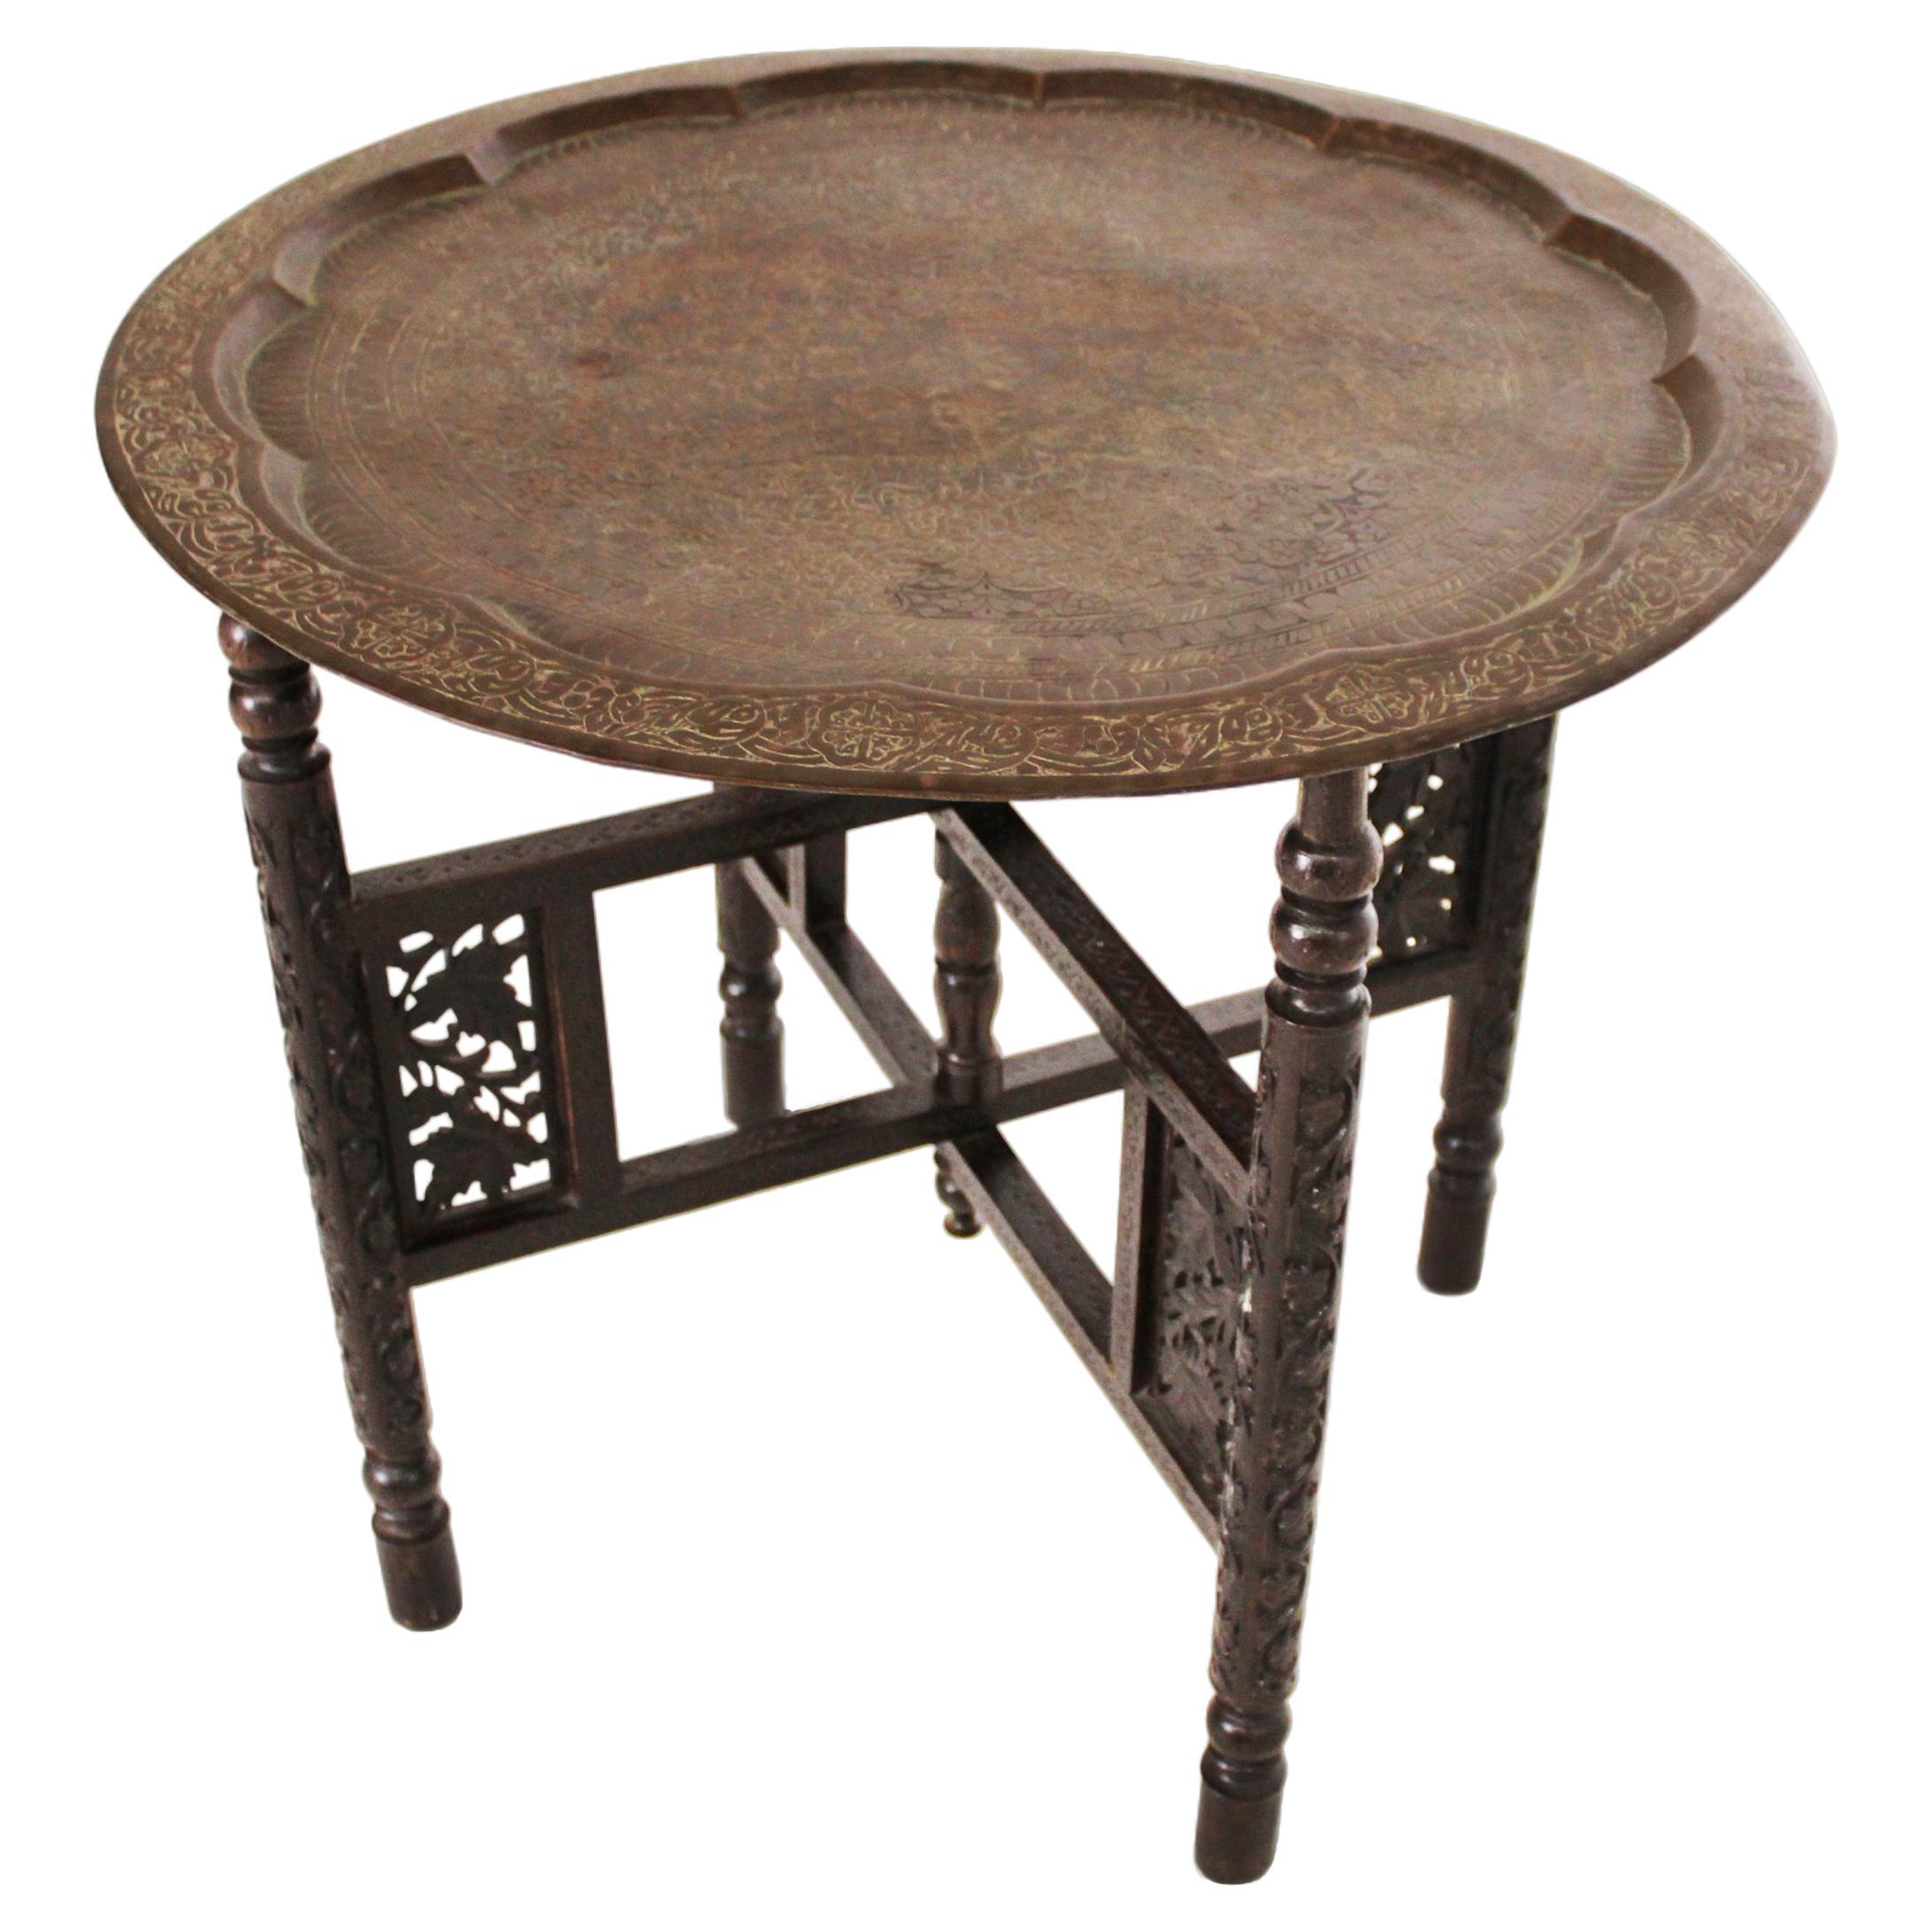 19th-century Anglo-Indian Brass Tray and Stand For Sale